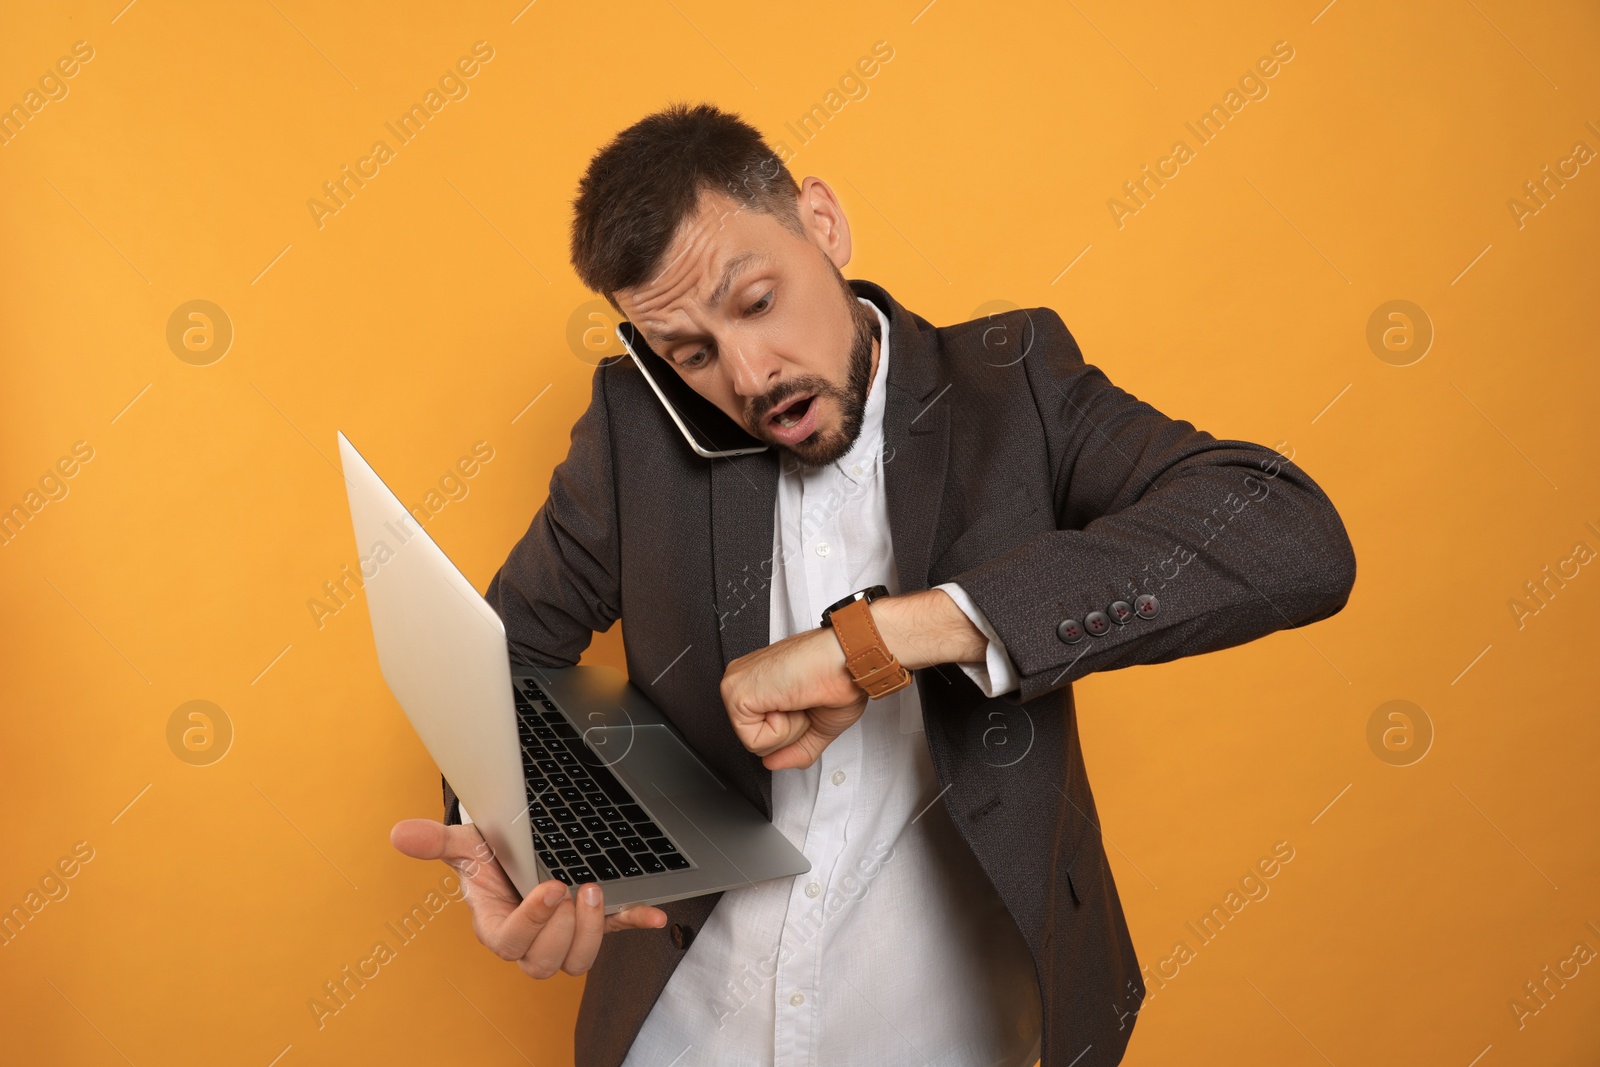 Photo of Emotional man with laptop checking time while talking on phone against orange background. Being late concept